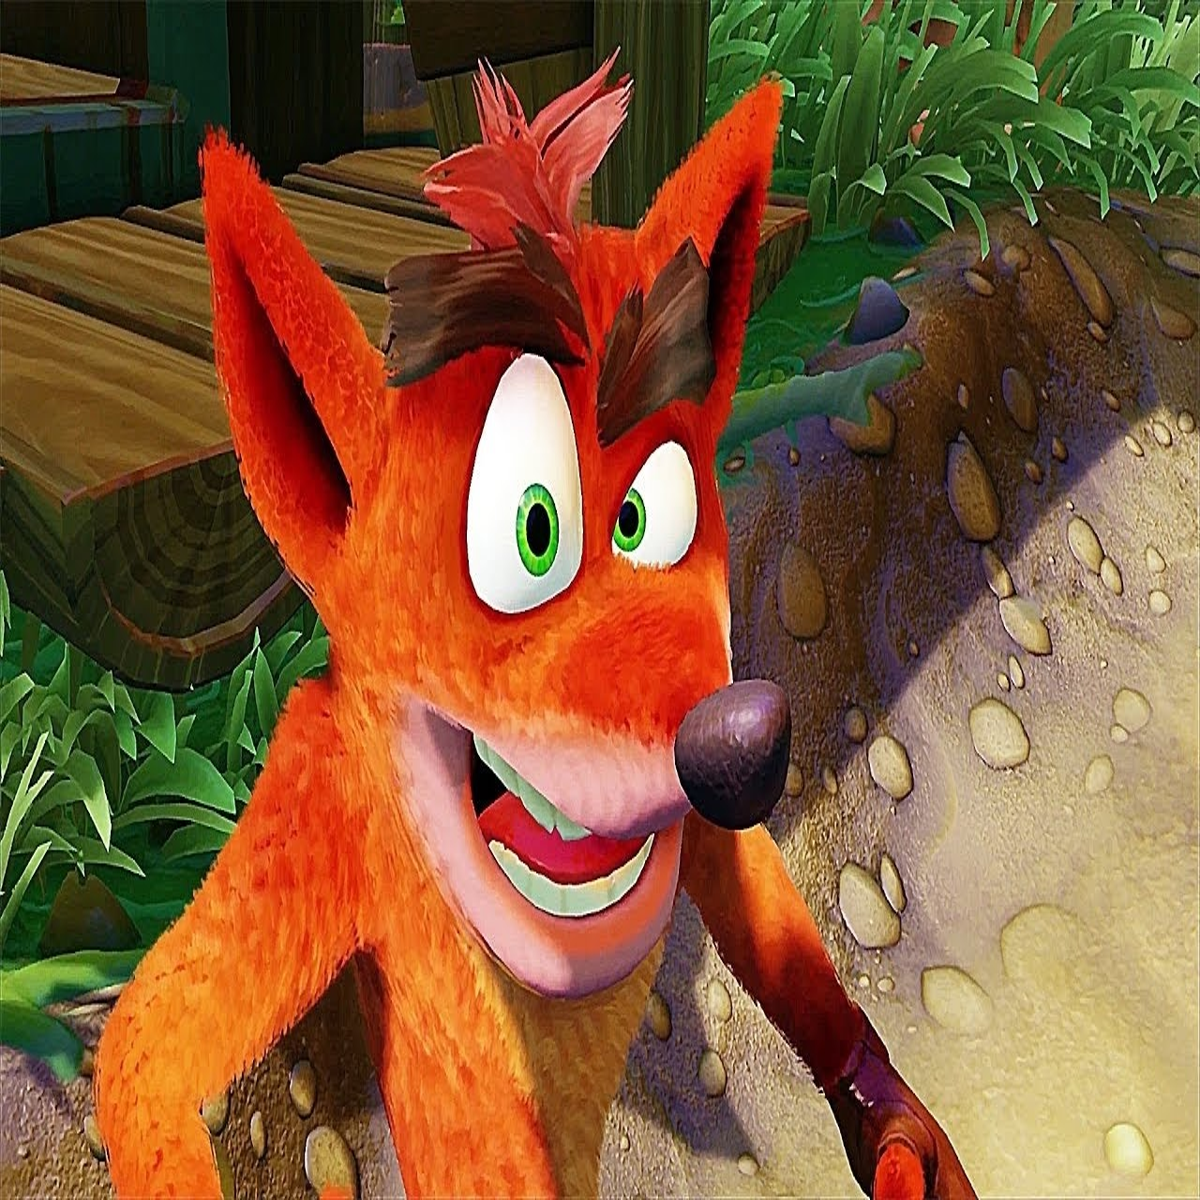 Is Crash Bandicoot Coming to 'Smash Ultimate'? Not This Time